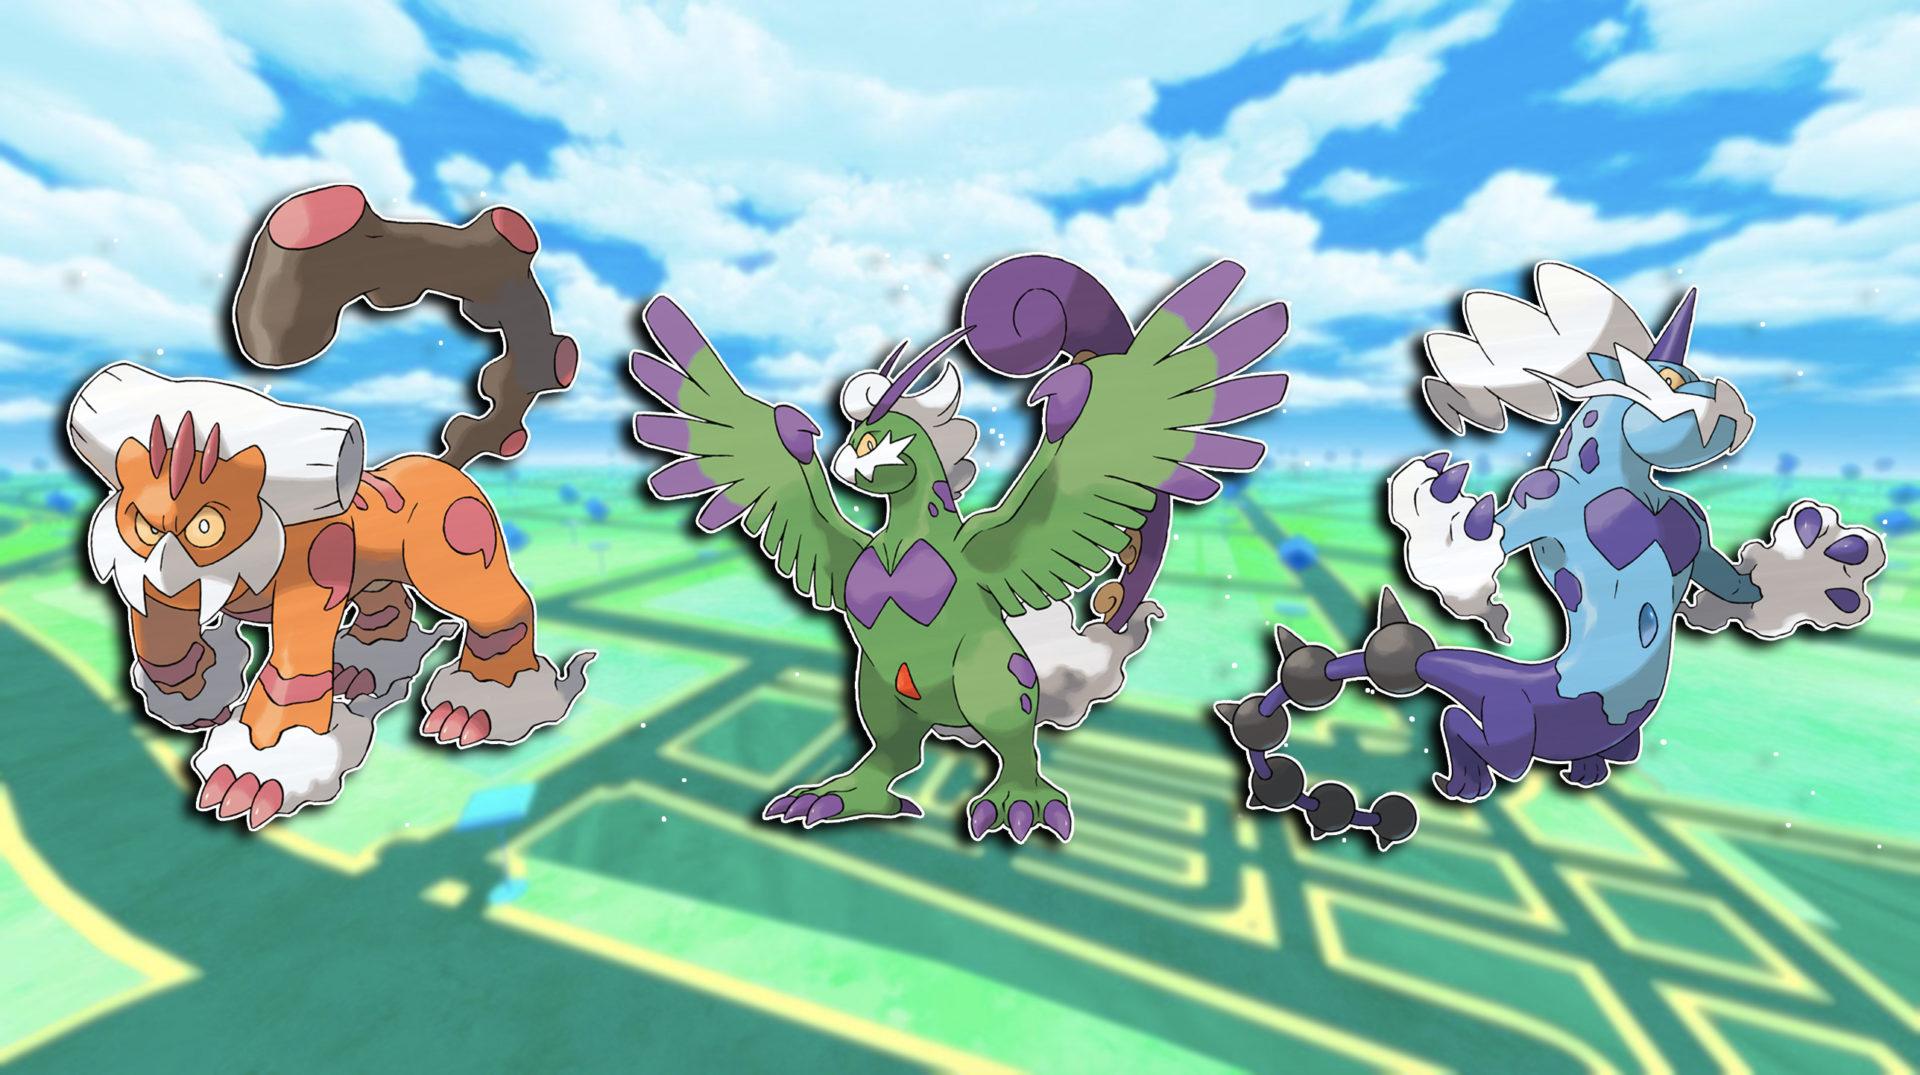 Screenshot of Forces of Nature trio over Pokemon Go map.